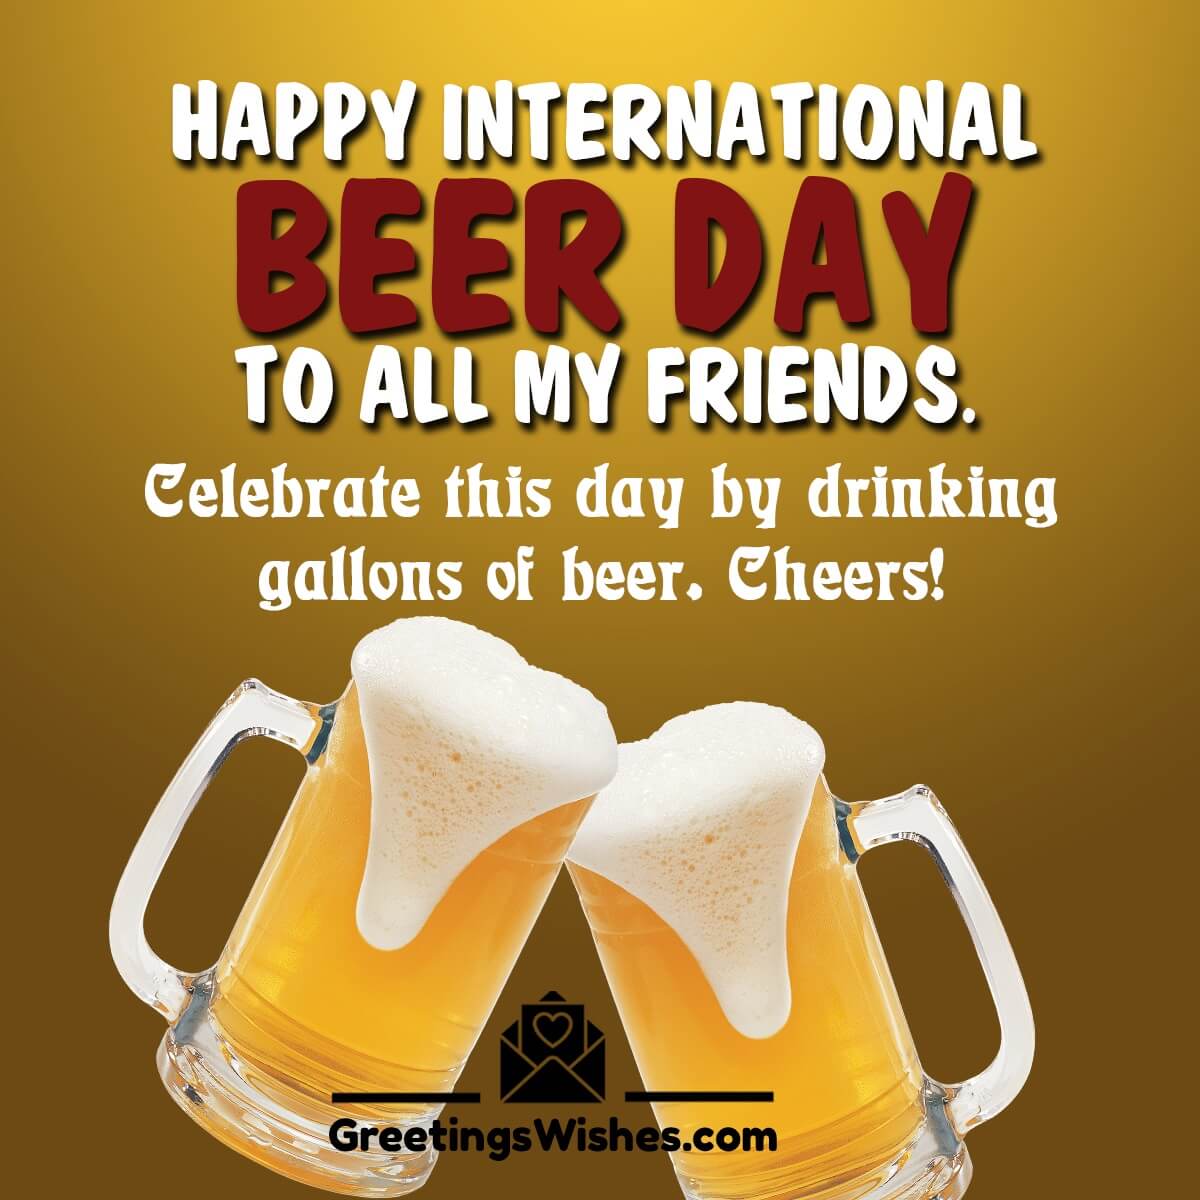 Happy International Beer Day To Friends